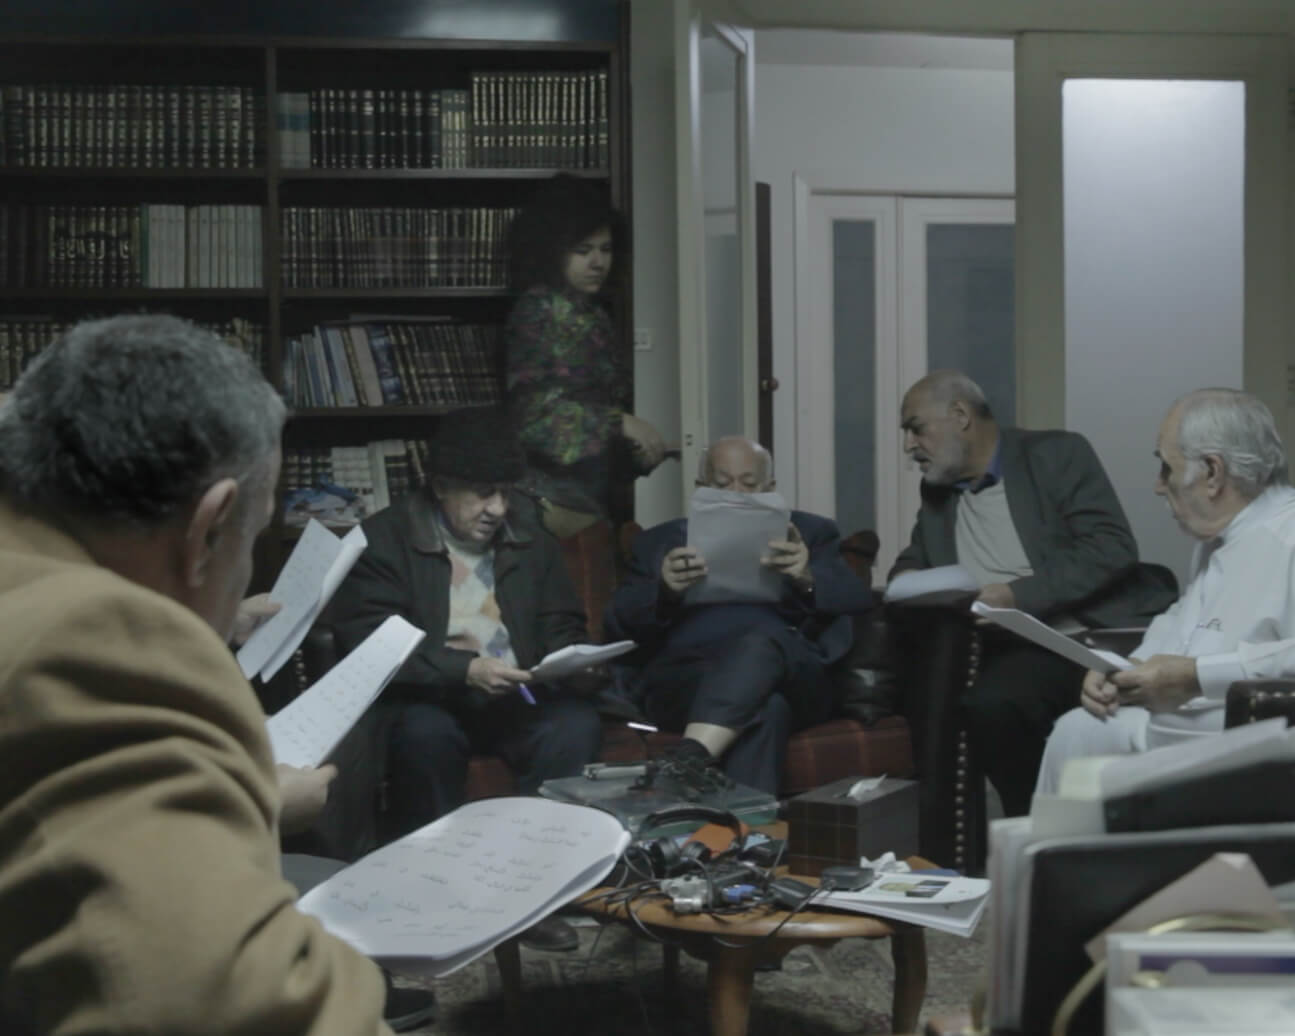 A group of men sits on couches holding papers in front of them. Farah Kassem is walking in the background next to a bookshelf. Color photograph.